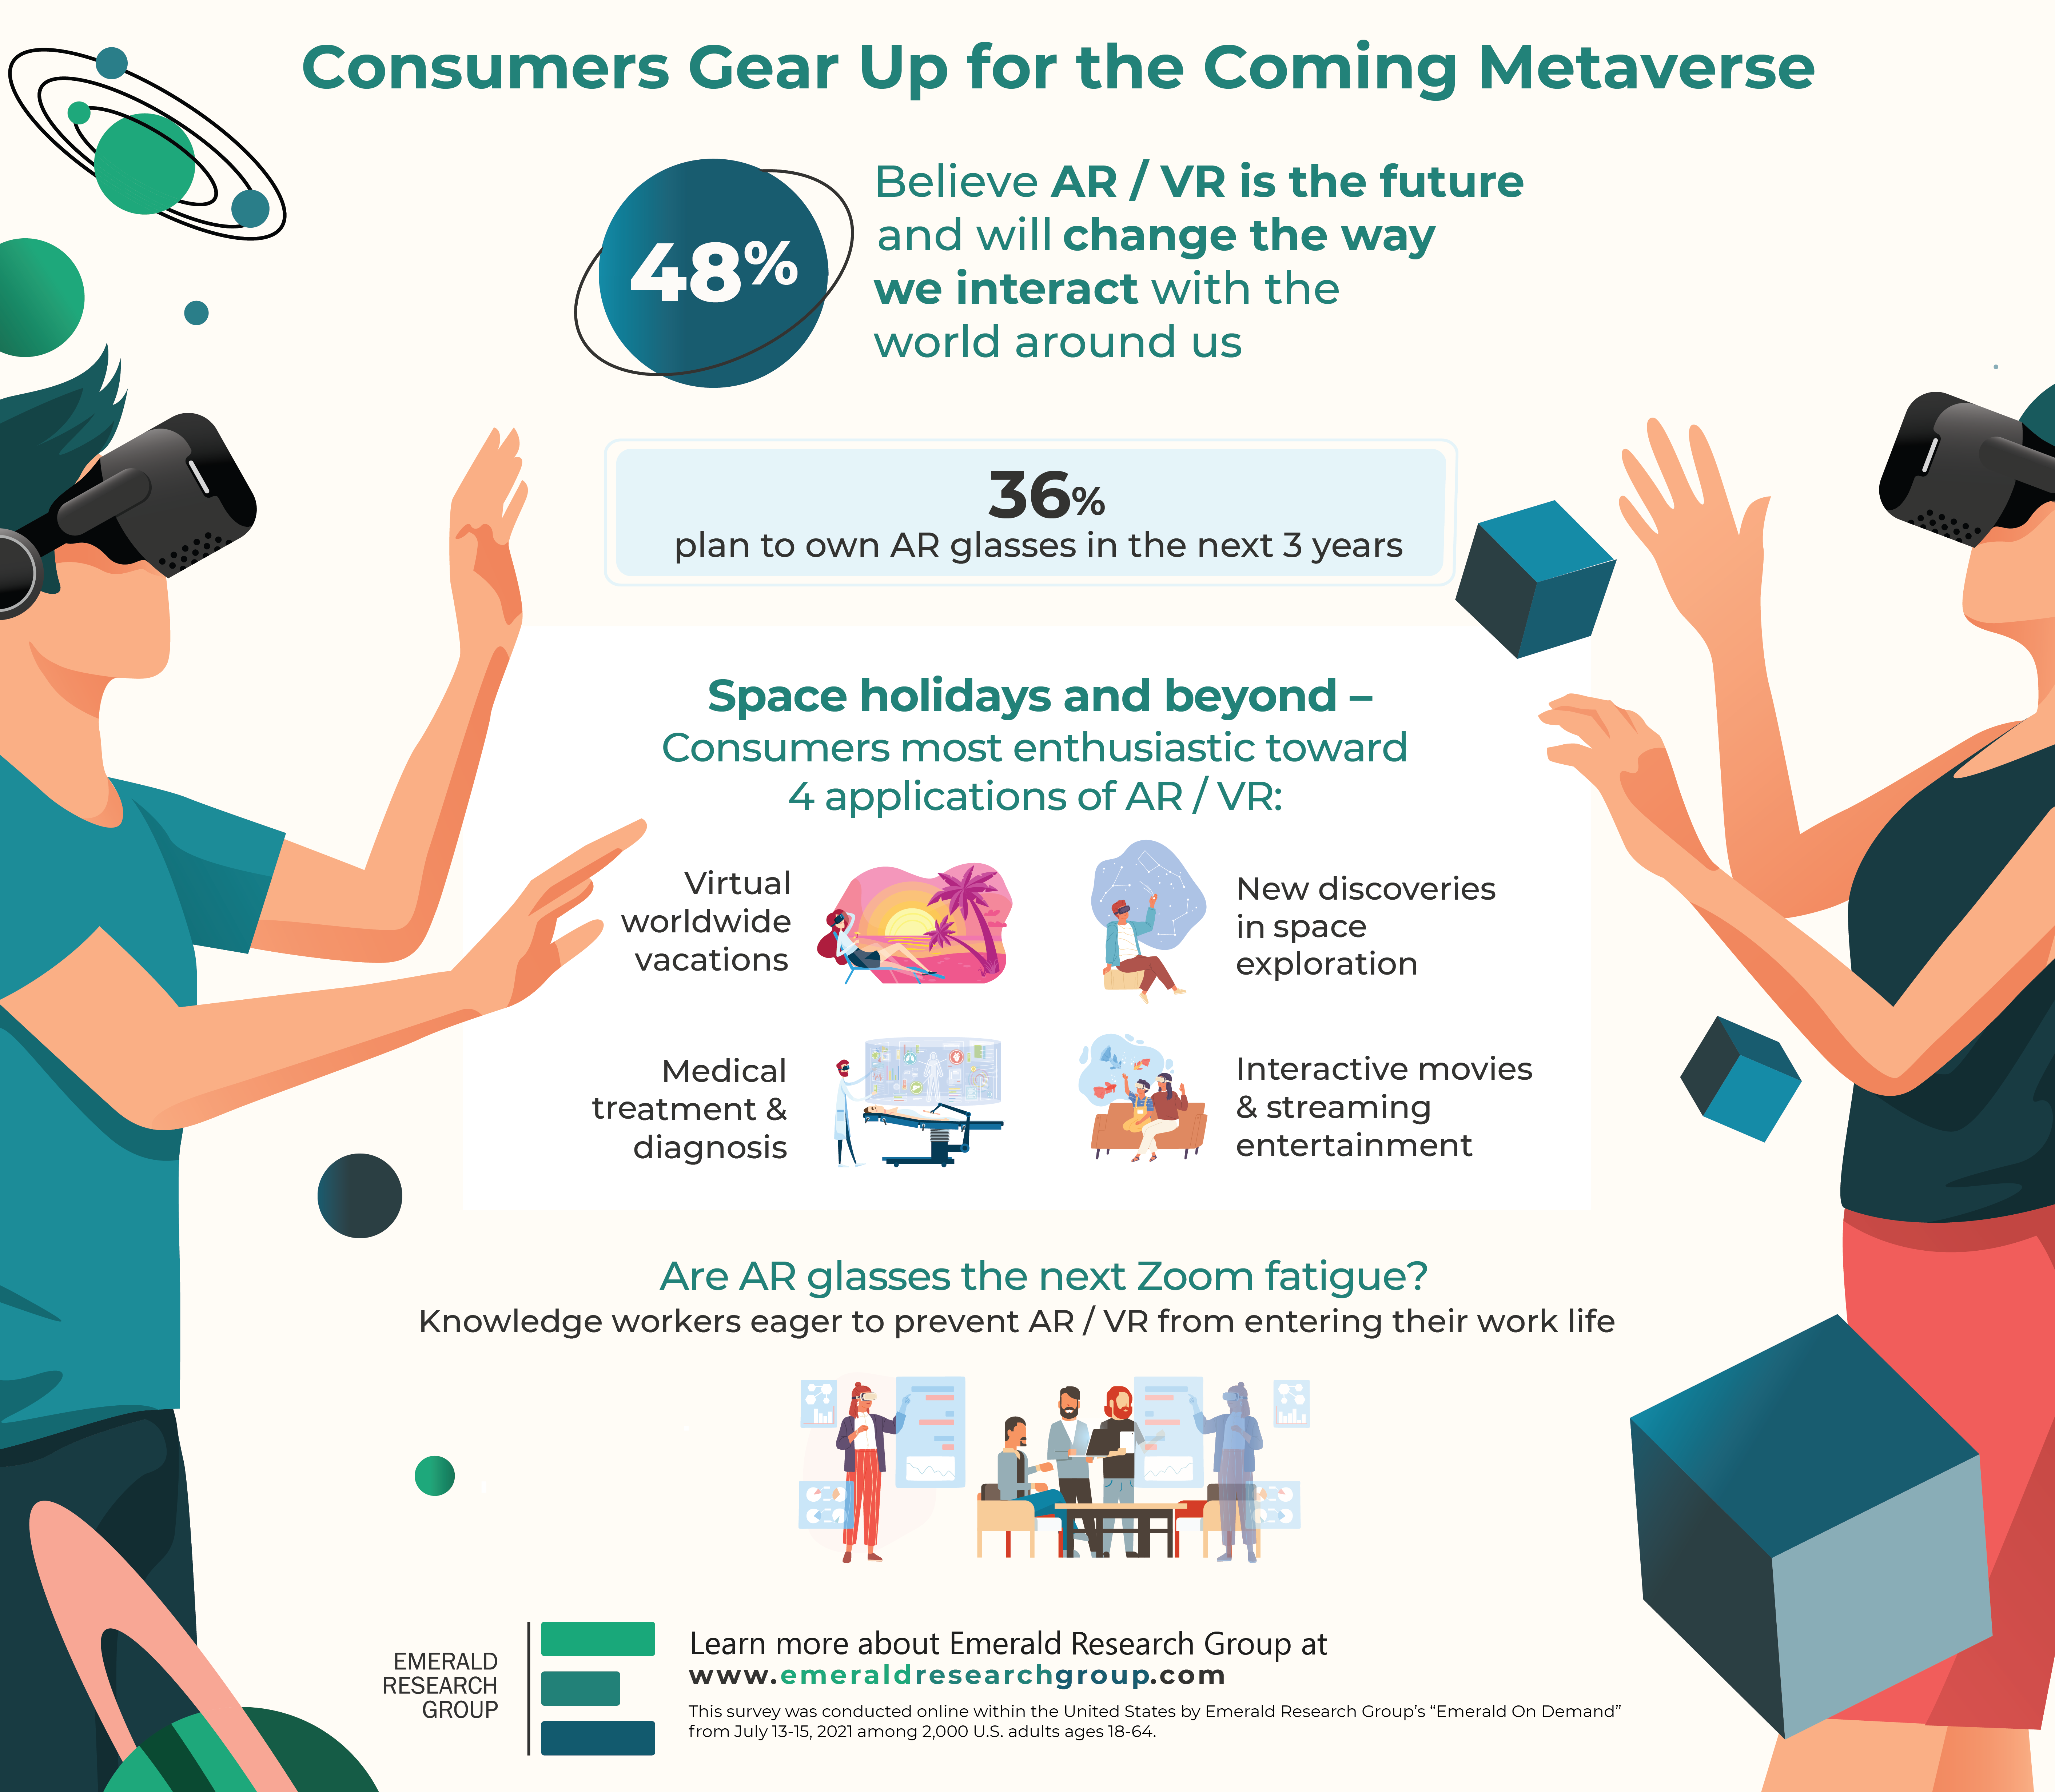 Consumers Gear Up for the Coming Metaverse